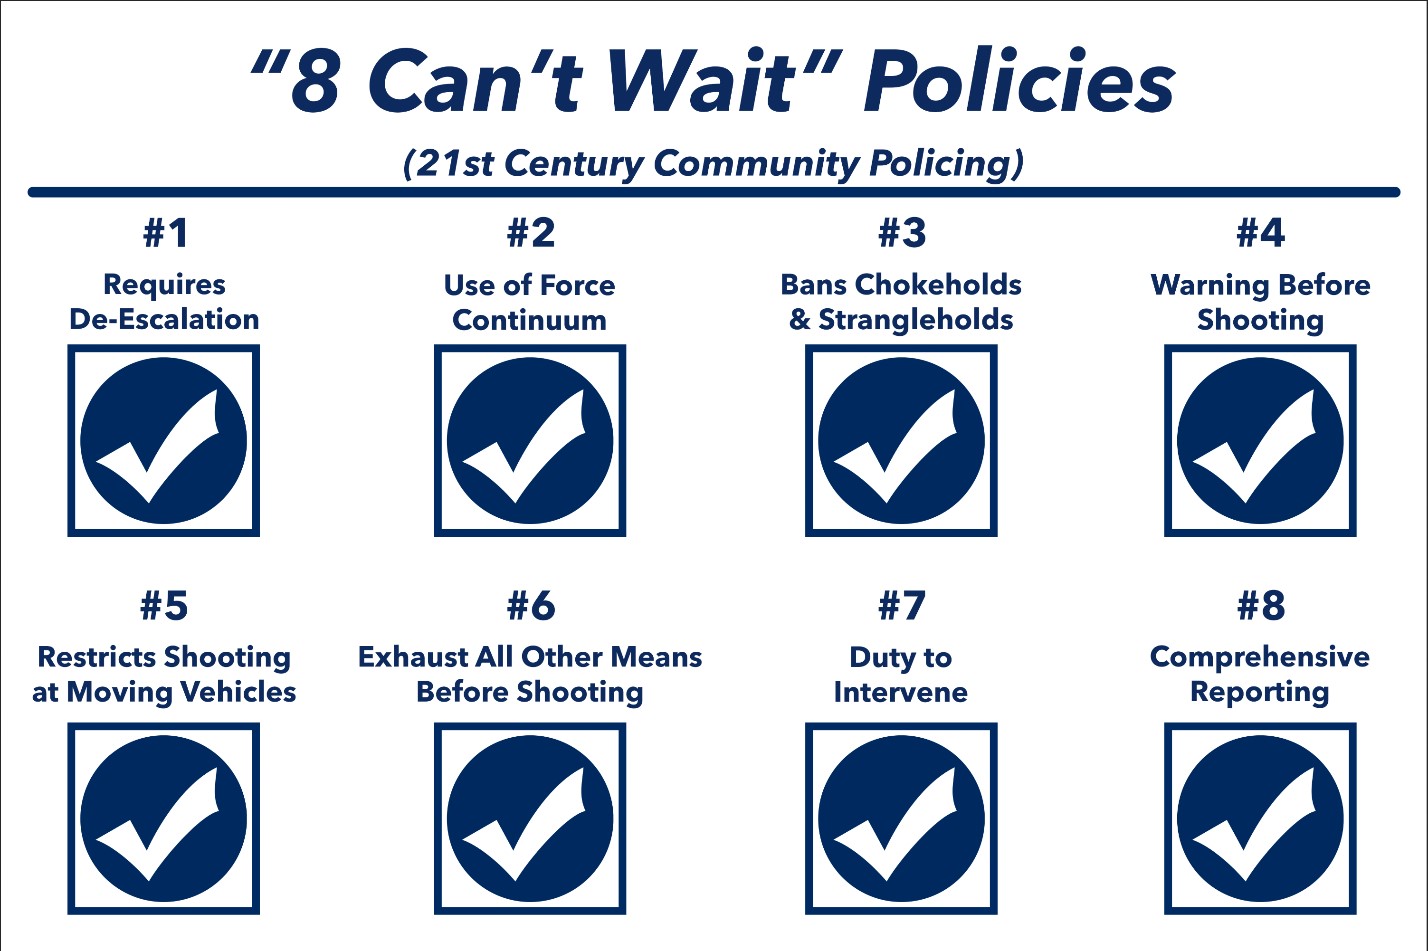 8 Can't Wait policies